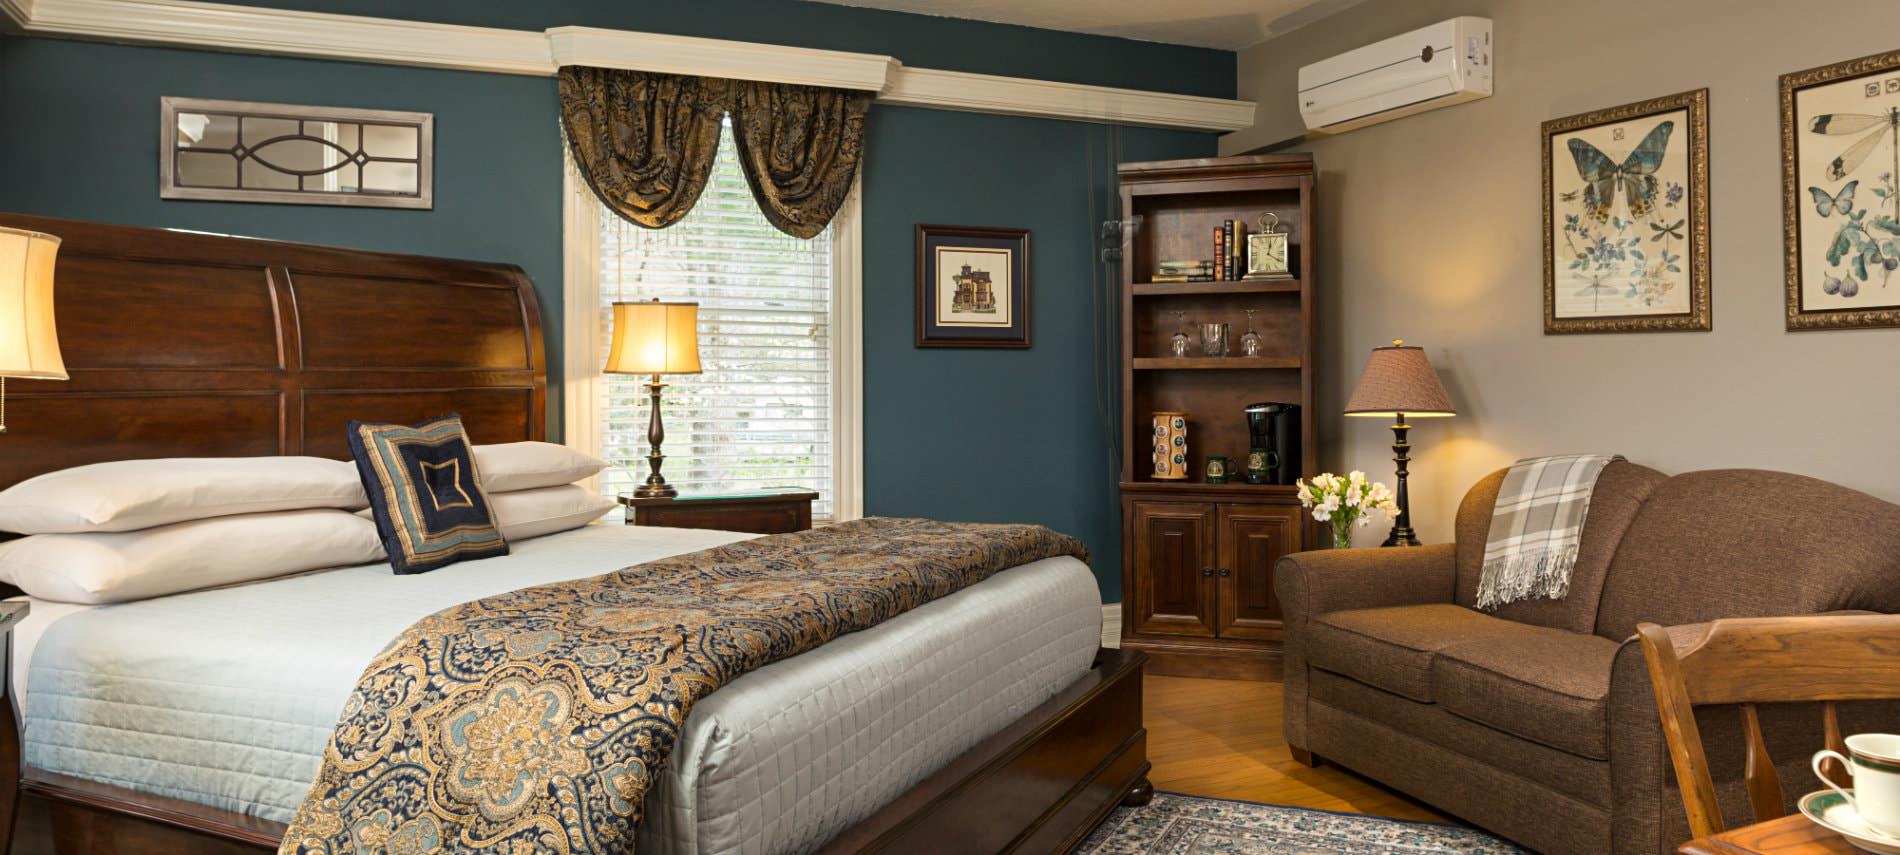 Elegant beige and navy room with wood floors, wood sleigh bed with blue and gold bedding, loveseat and window